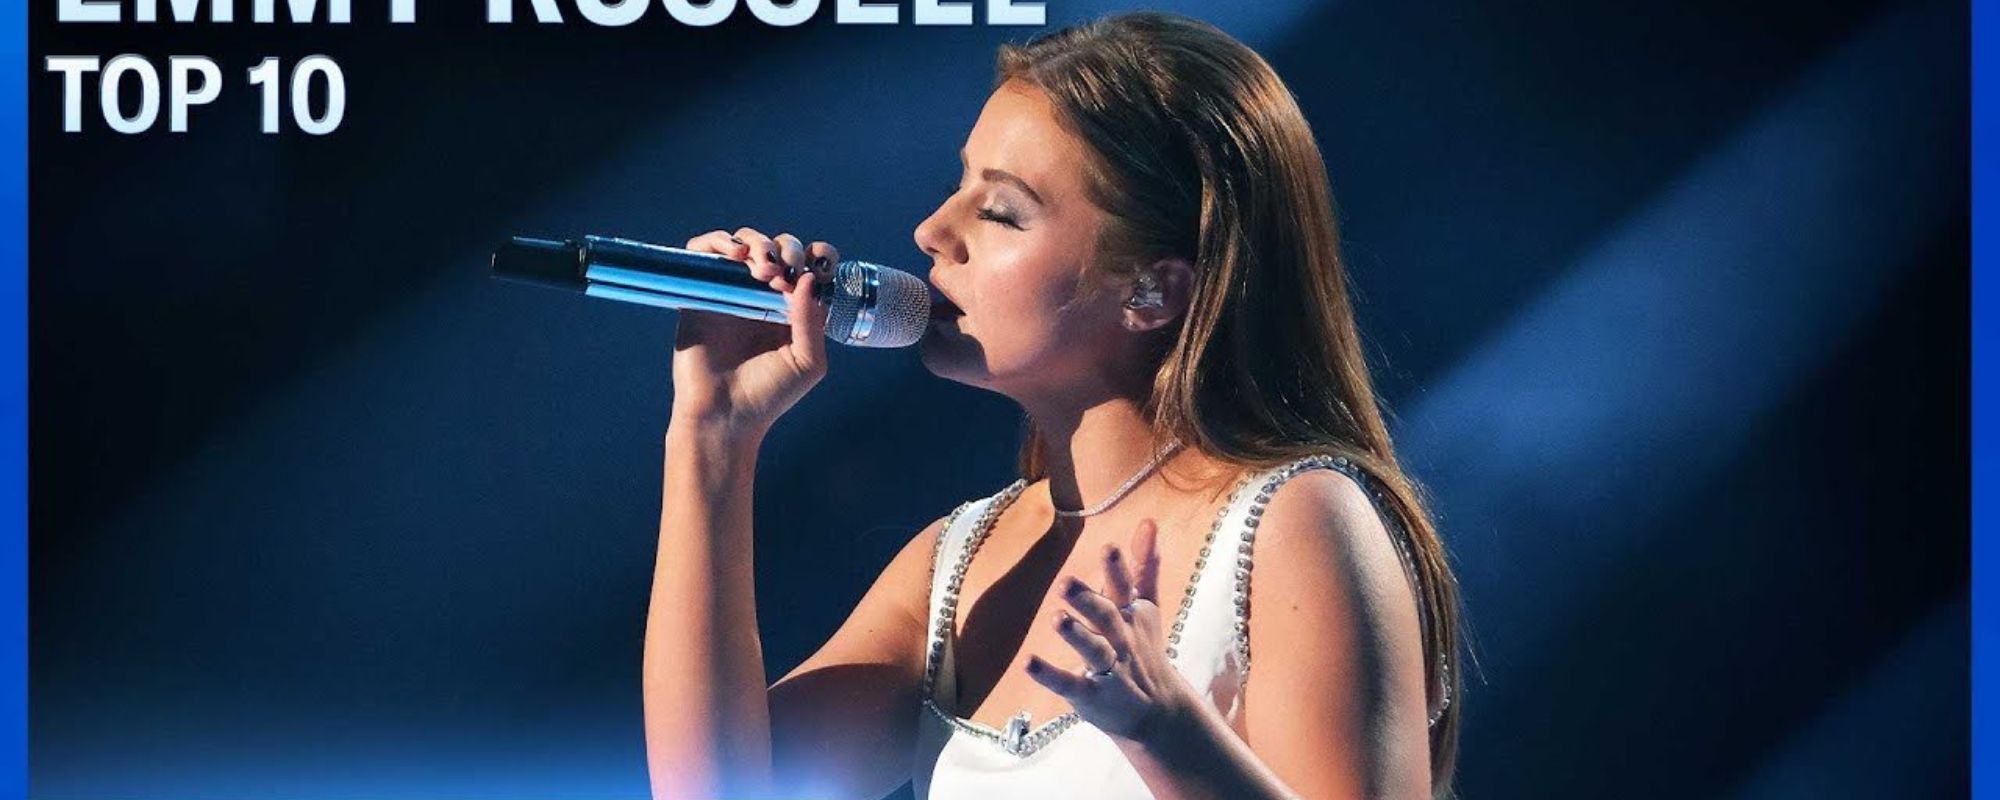 Emmy Russell Gets ‘American Idol’ Dancing With Joyous Walk the Moon Performance